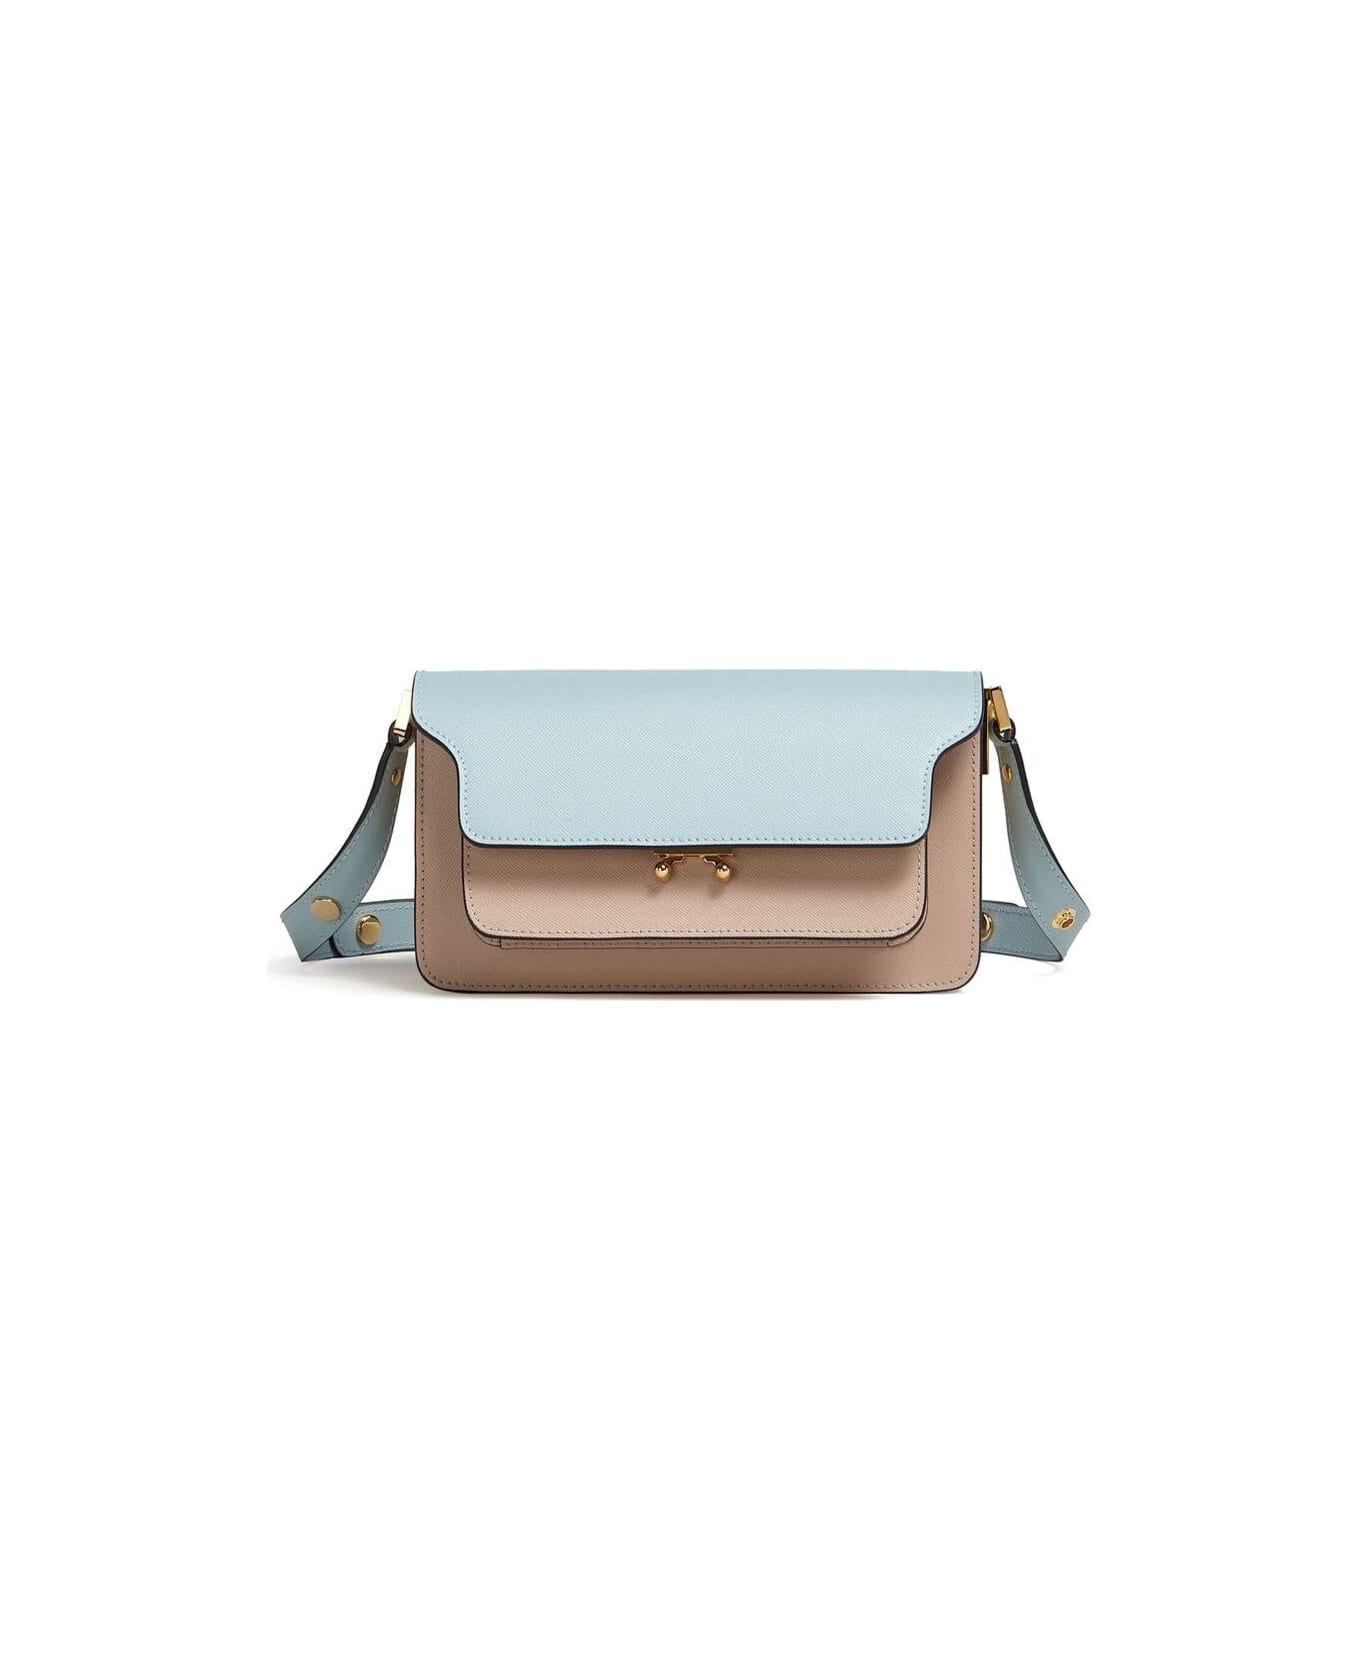 Marni Pink And Light-bluetrunk Crossbody Bag In Saffiano Leather Woman - Multicolor